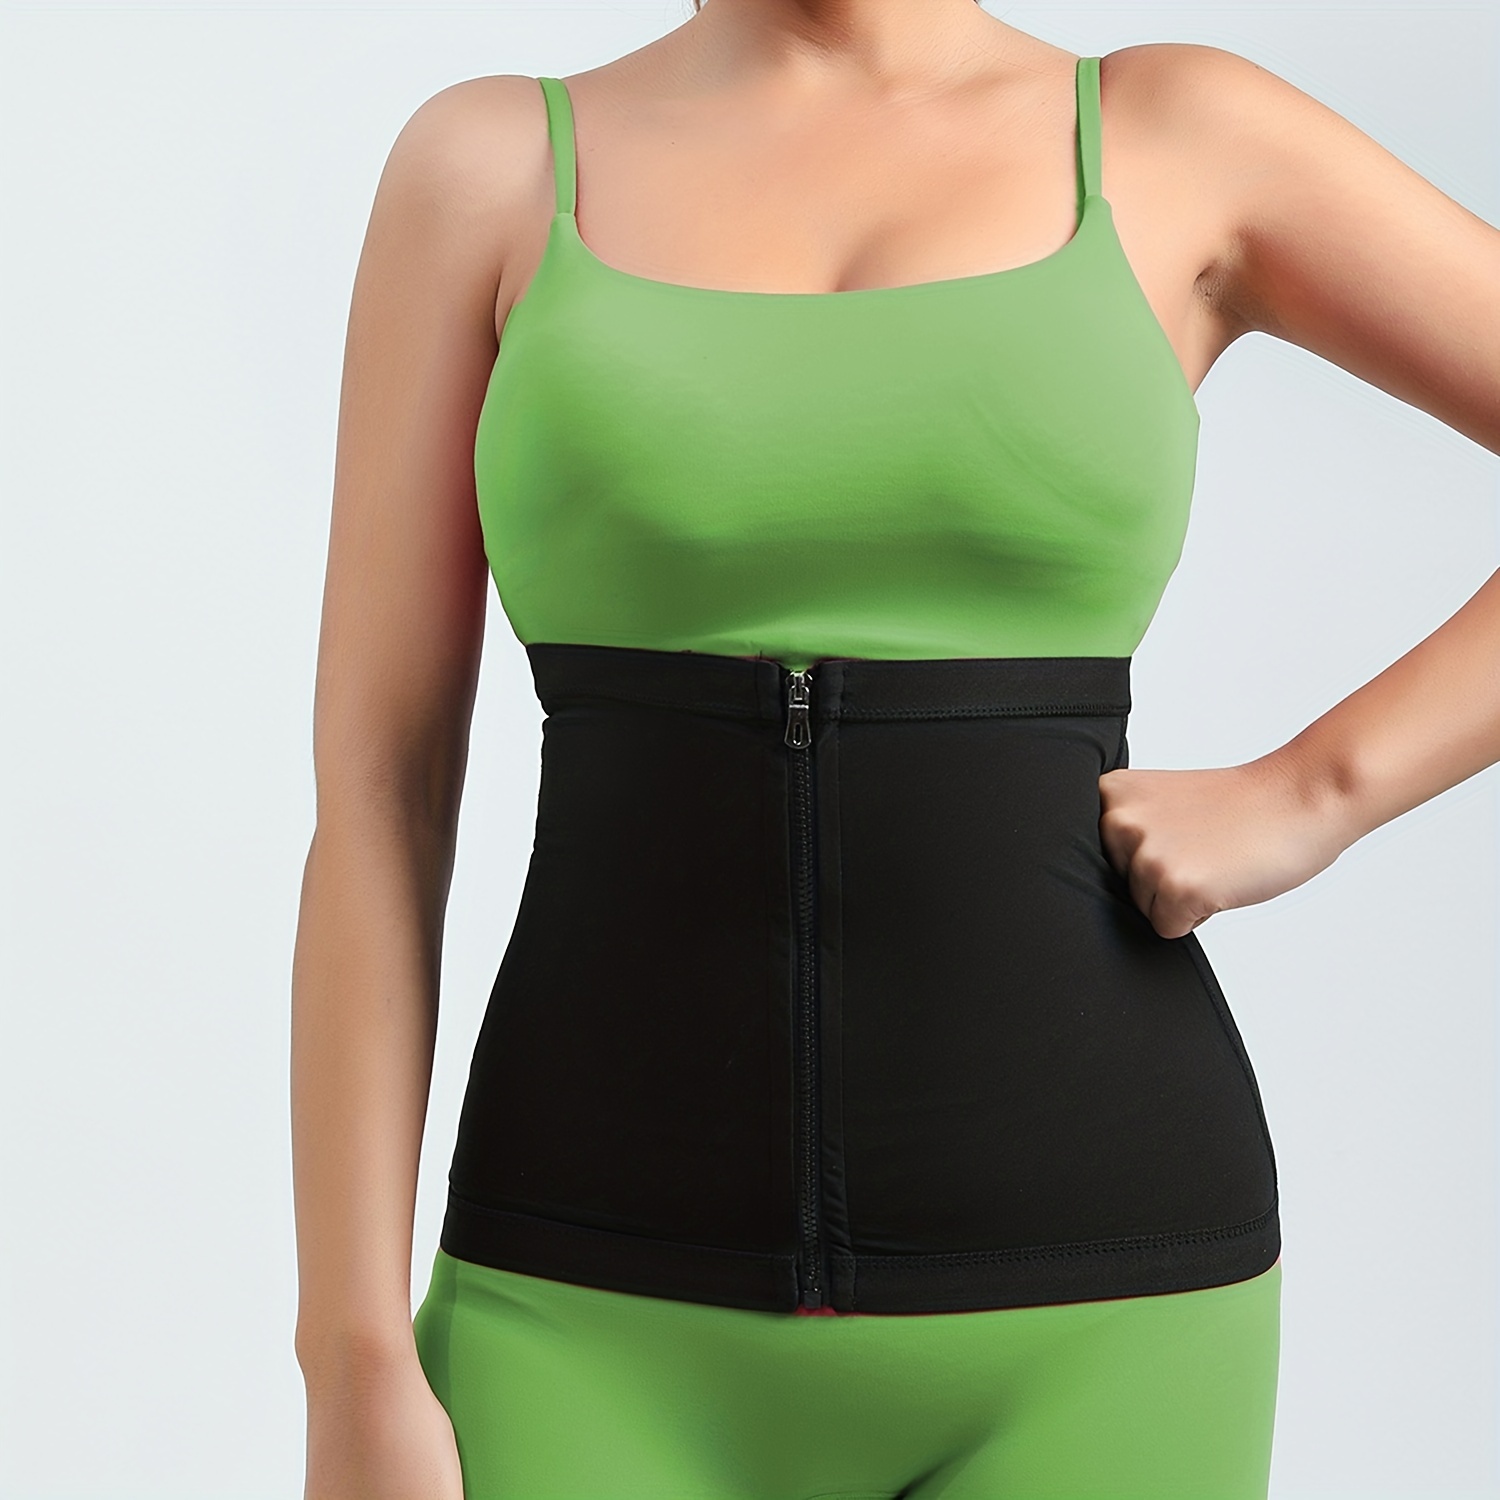 Buy FirstFit Women's Thermo Sweat Shaper for Workout, Fitness, Gym Training,  Yoga, Weight Loss Pants, Slim Tummy Trimmer Body Shaper Waist - S/M  [Waist-(27-33)